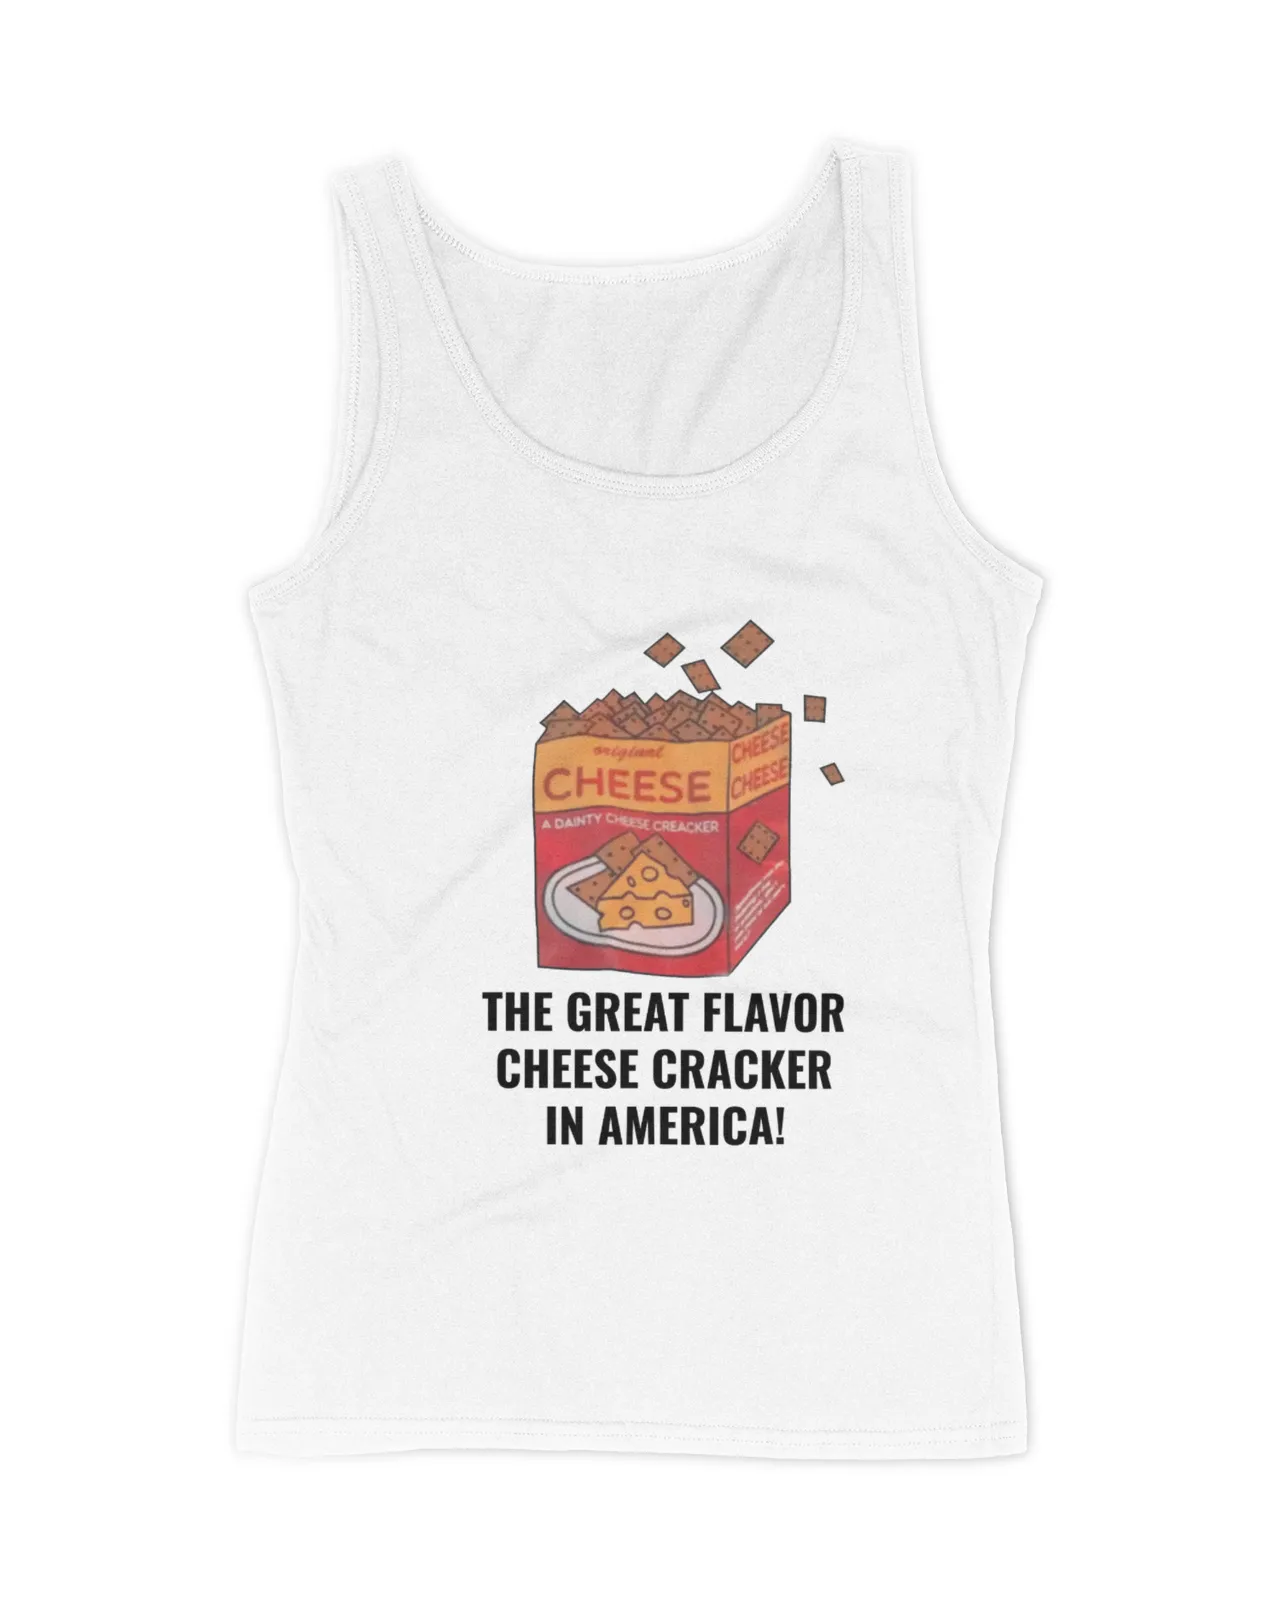 The Great Flavor Cheese Cracker In America Shirt